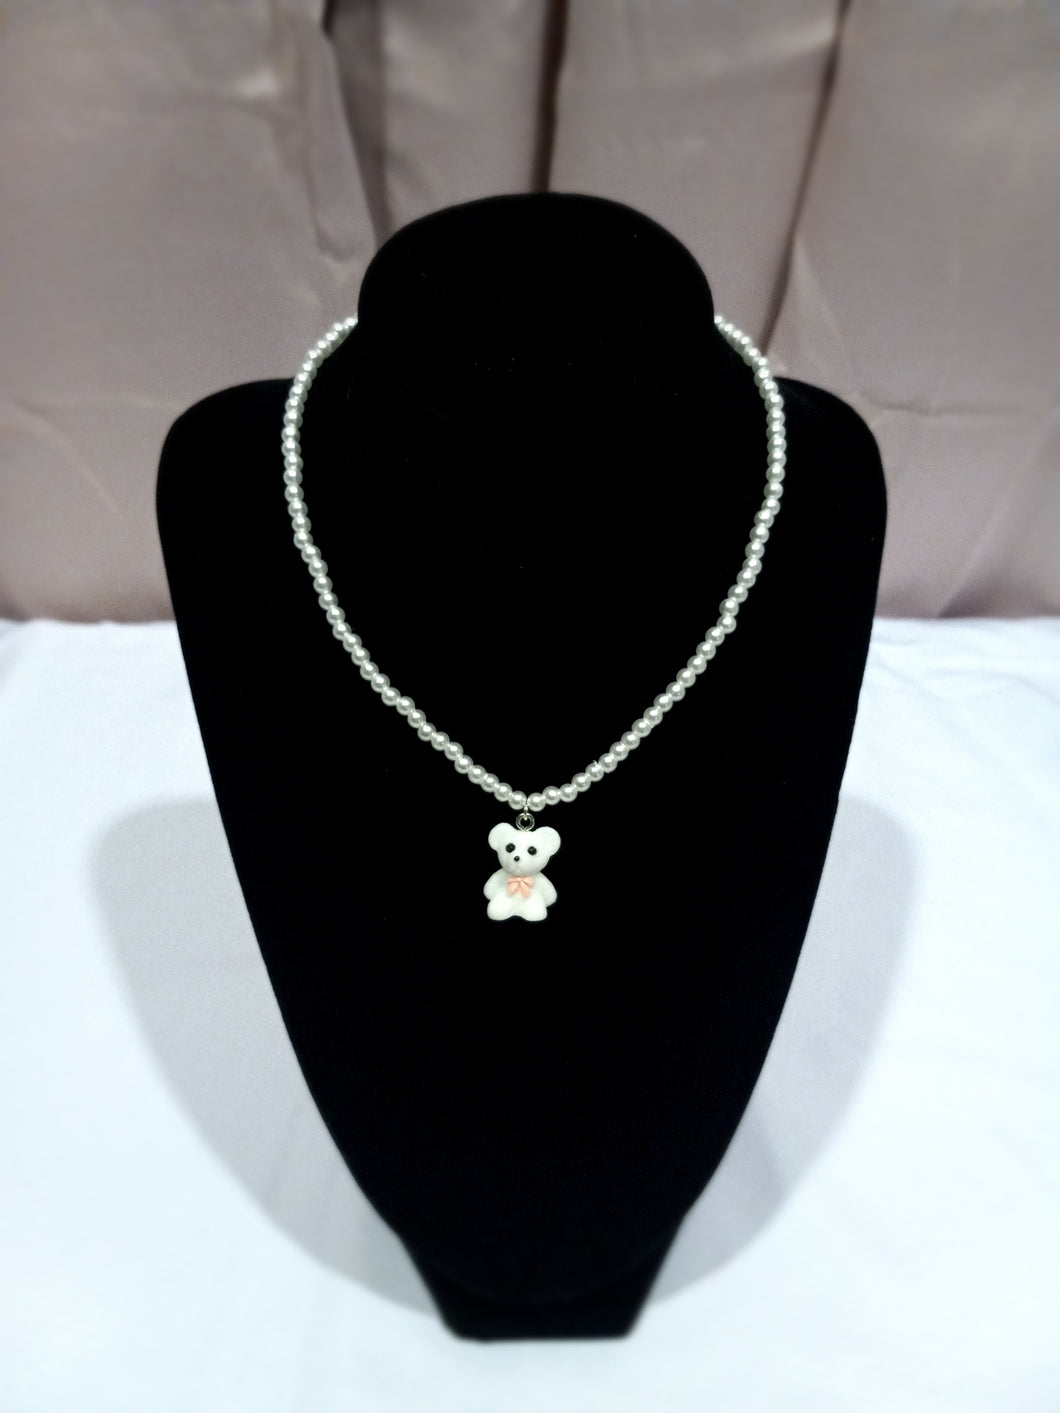 Pearl Necklace with Teddy Bear